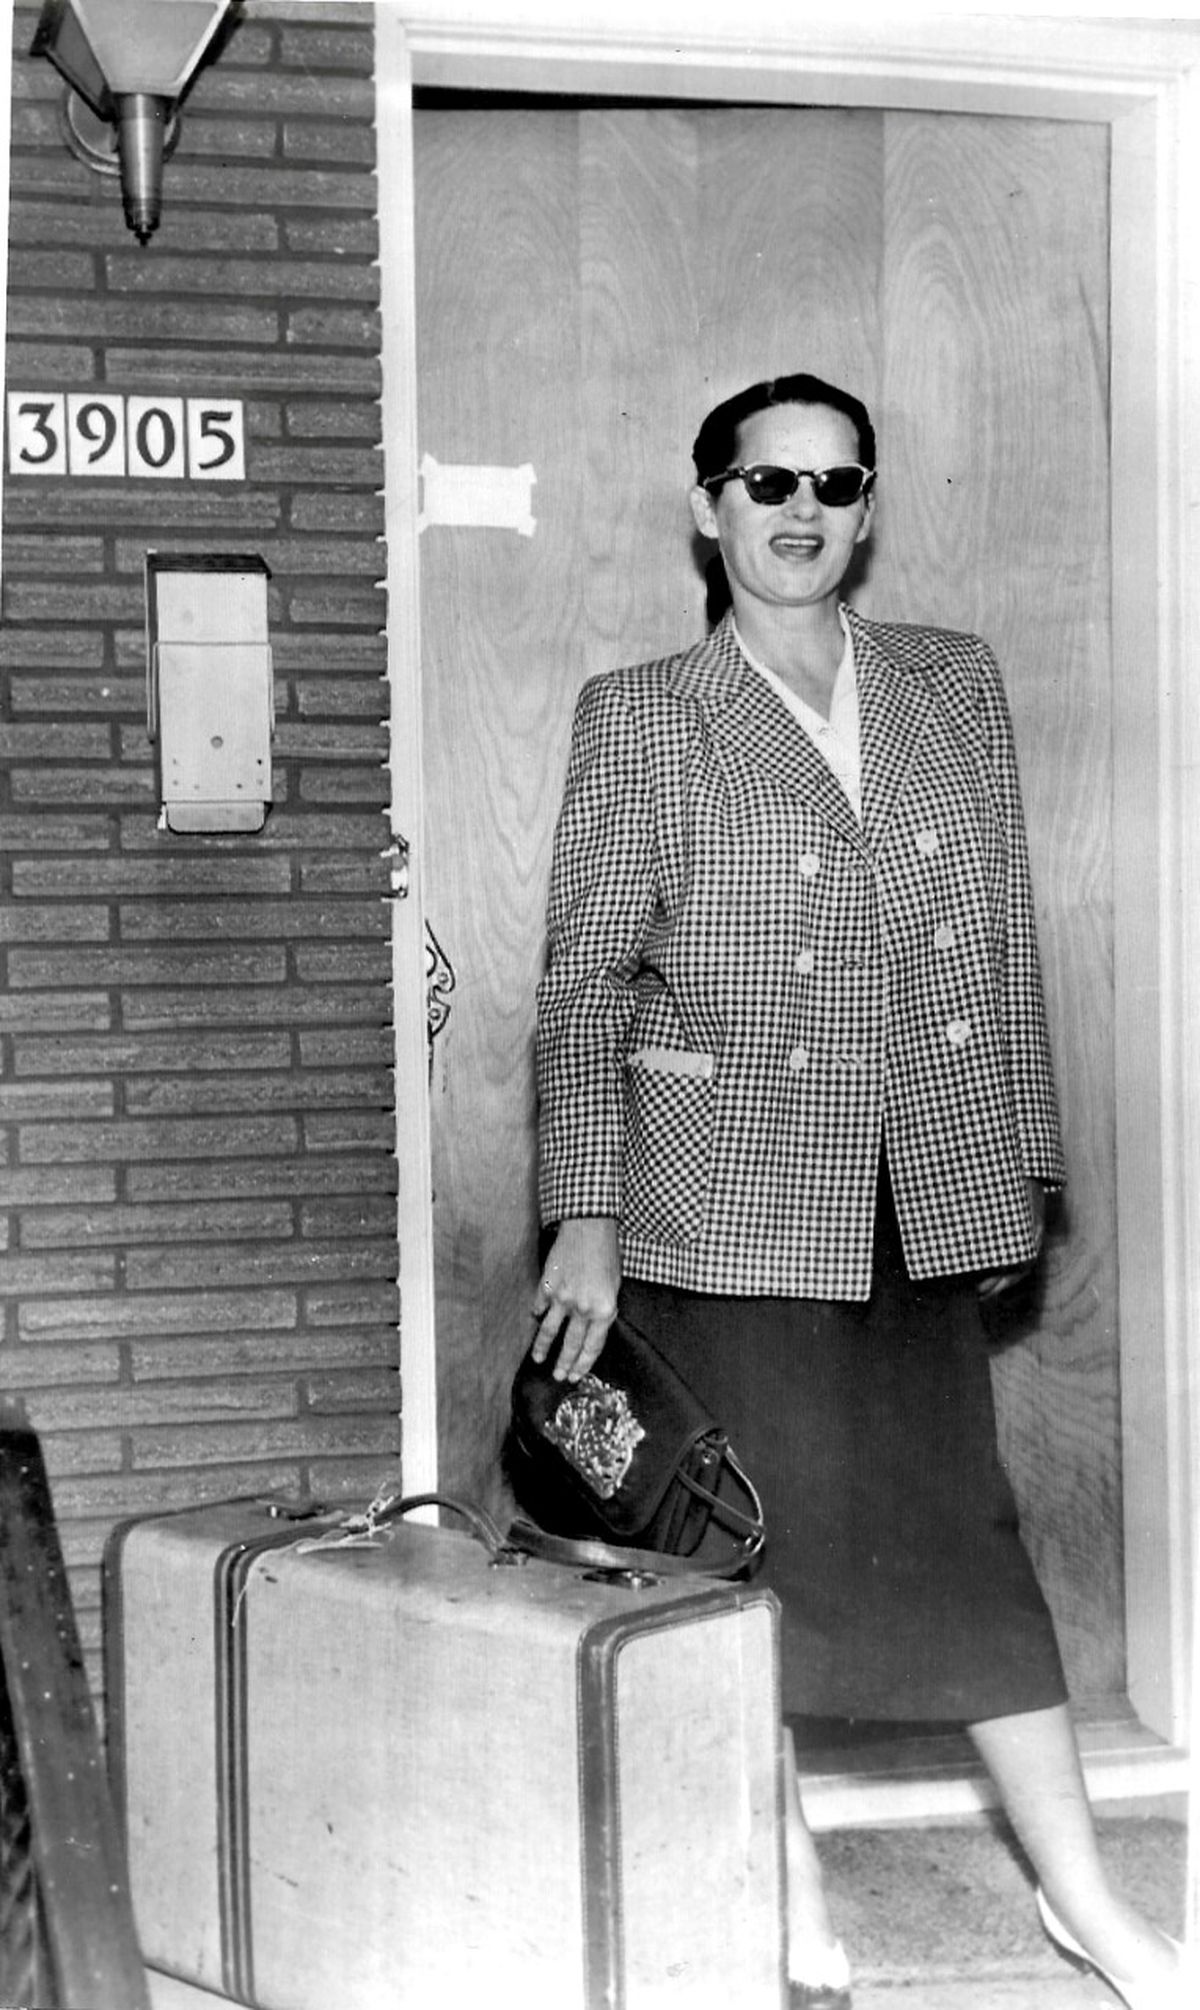 A photo of Virginia Hill in front of her Spokane house at 39th Avenue and South Skyview Drive on the South Hill appeared in October 1955 in the Houston Post. The Post’s caption read: “Spokane, Wash. LOCKED OUT. A miffed Virginia Hill arriving with baggage but barred from her expensive home by a treasury agent.”  (Courtesy of Darin Krogh/For The Spokesman-Review)